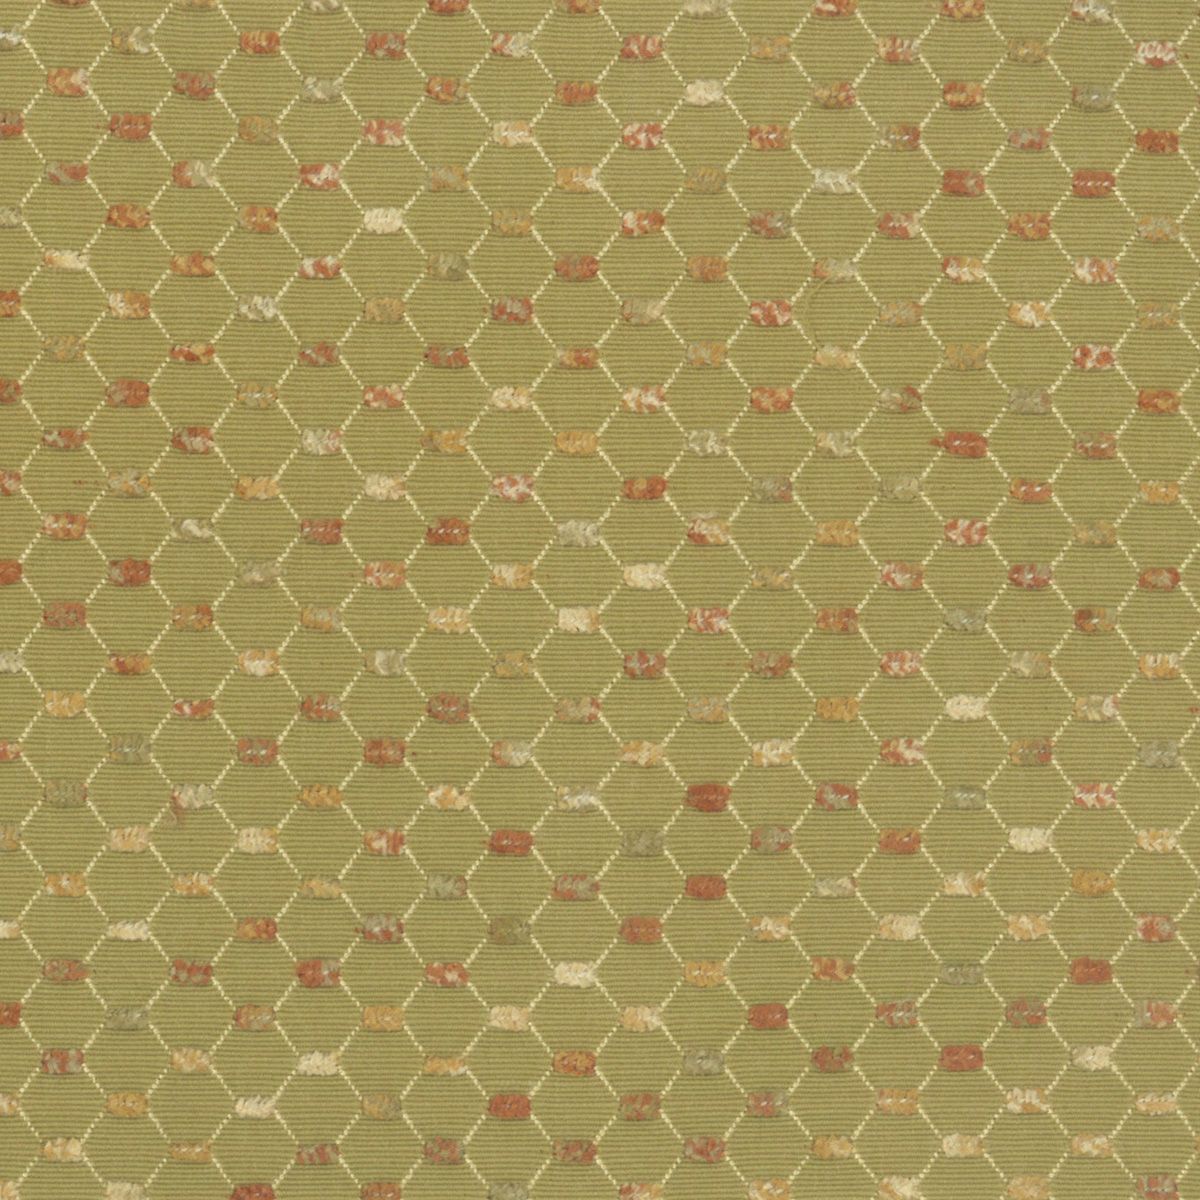 Arden fabric in meadow color - pattern number JC 0003UP80 - by Scalamandre in the Old World Weavers collection